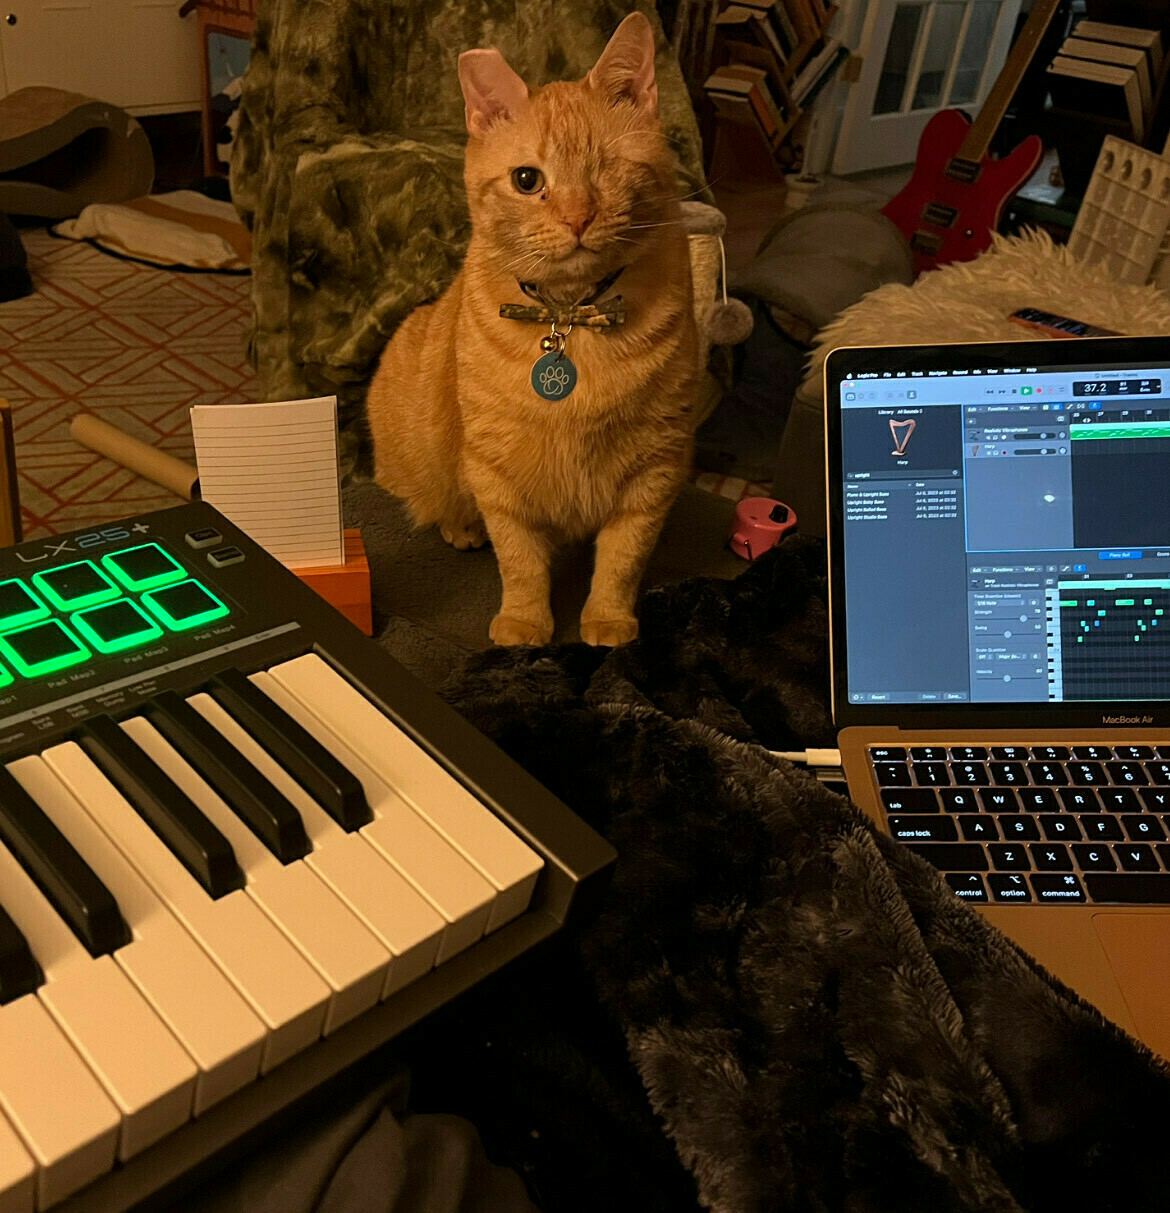 An orange tabby with one eye sits between a synthesizer keyboard and a laptop.